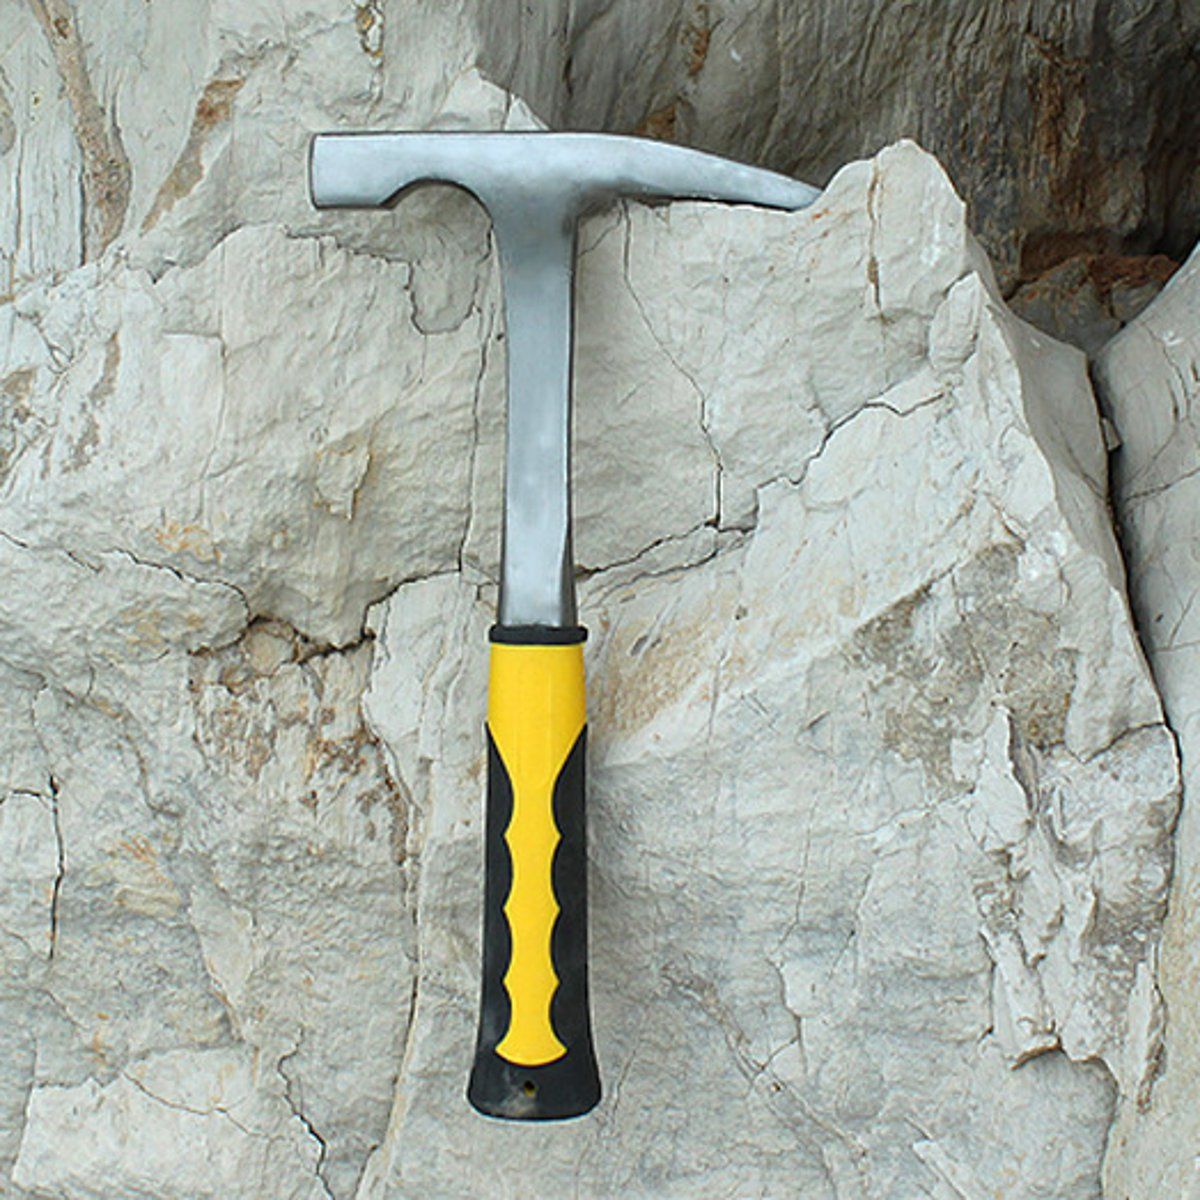 Shock-Reduction-Edge-Sharpness-Geological-Hammer-Geology-Tool-Hammers-1545586